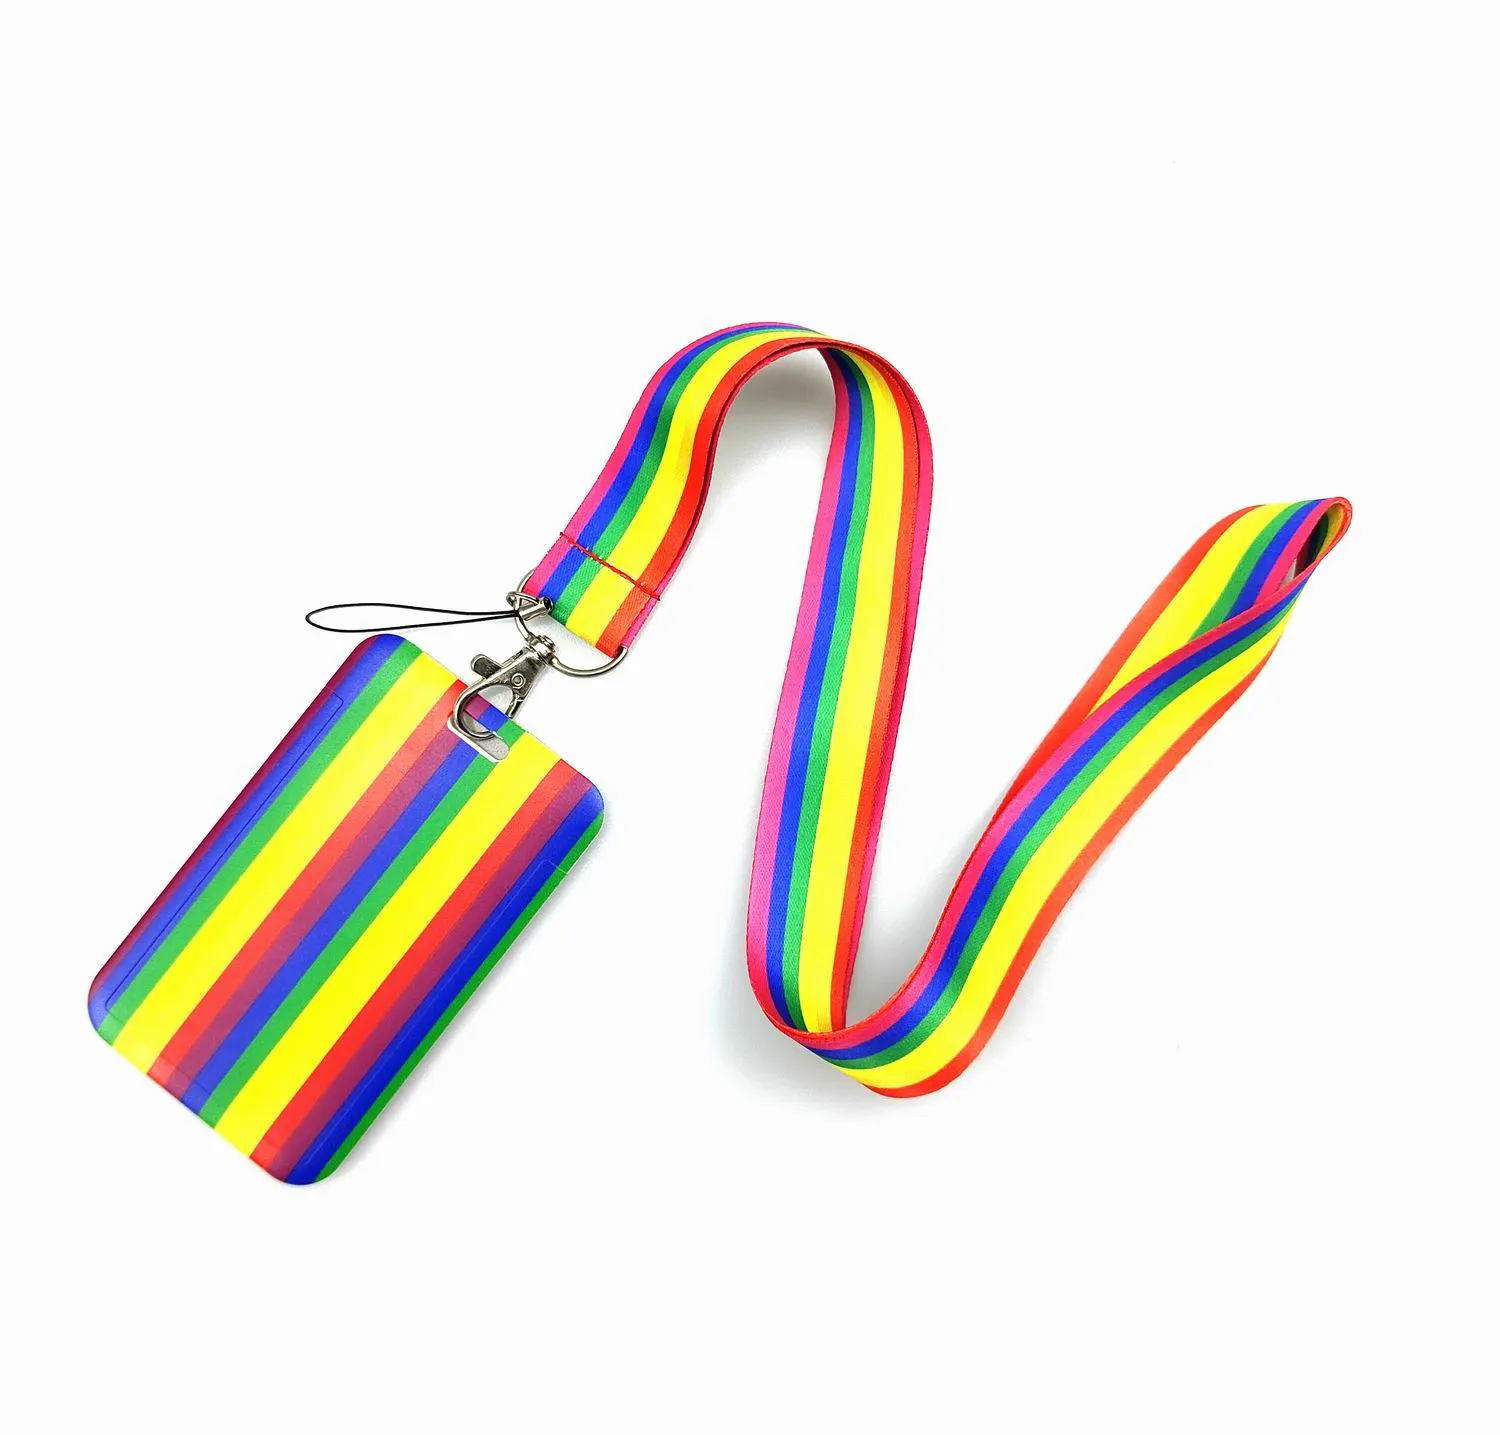 Colorful Lanyard Rainbow Neck Strap for key ID Card Cellphone Straps Badge Holder DIY Hanging Rope Neckband Accessories